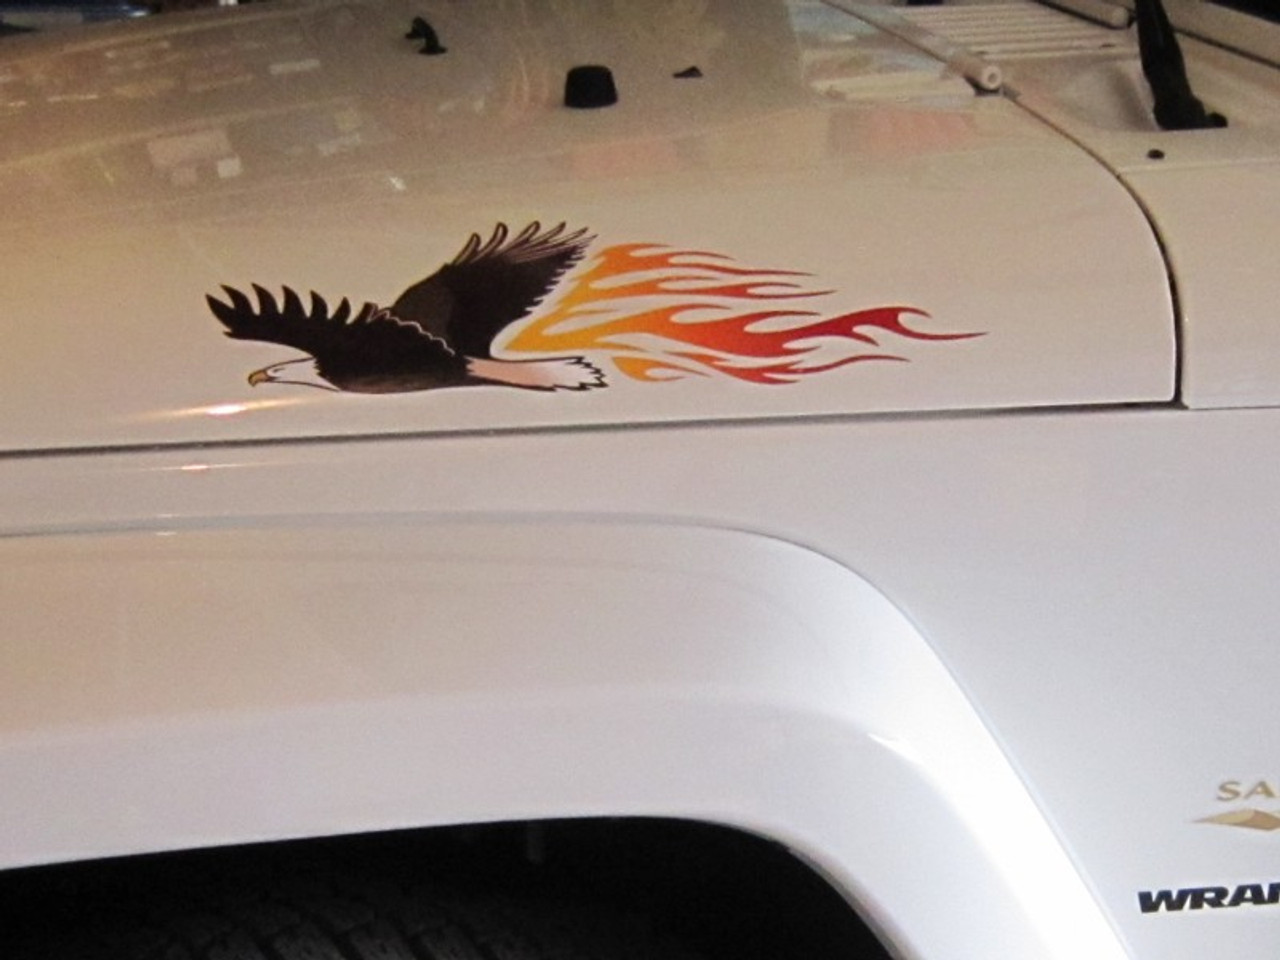 Eagle flames decal shown on Jeep Wrangler